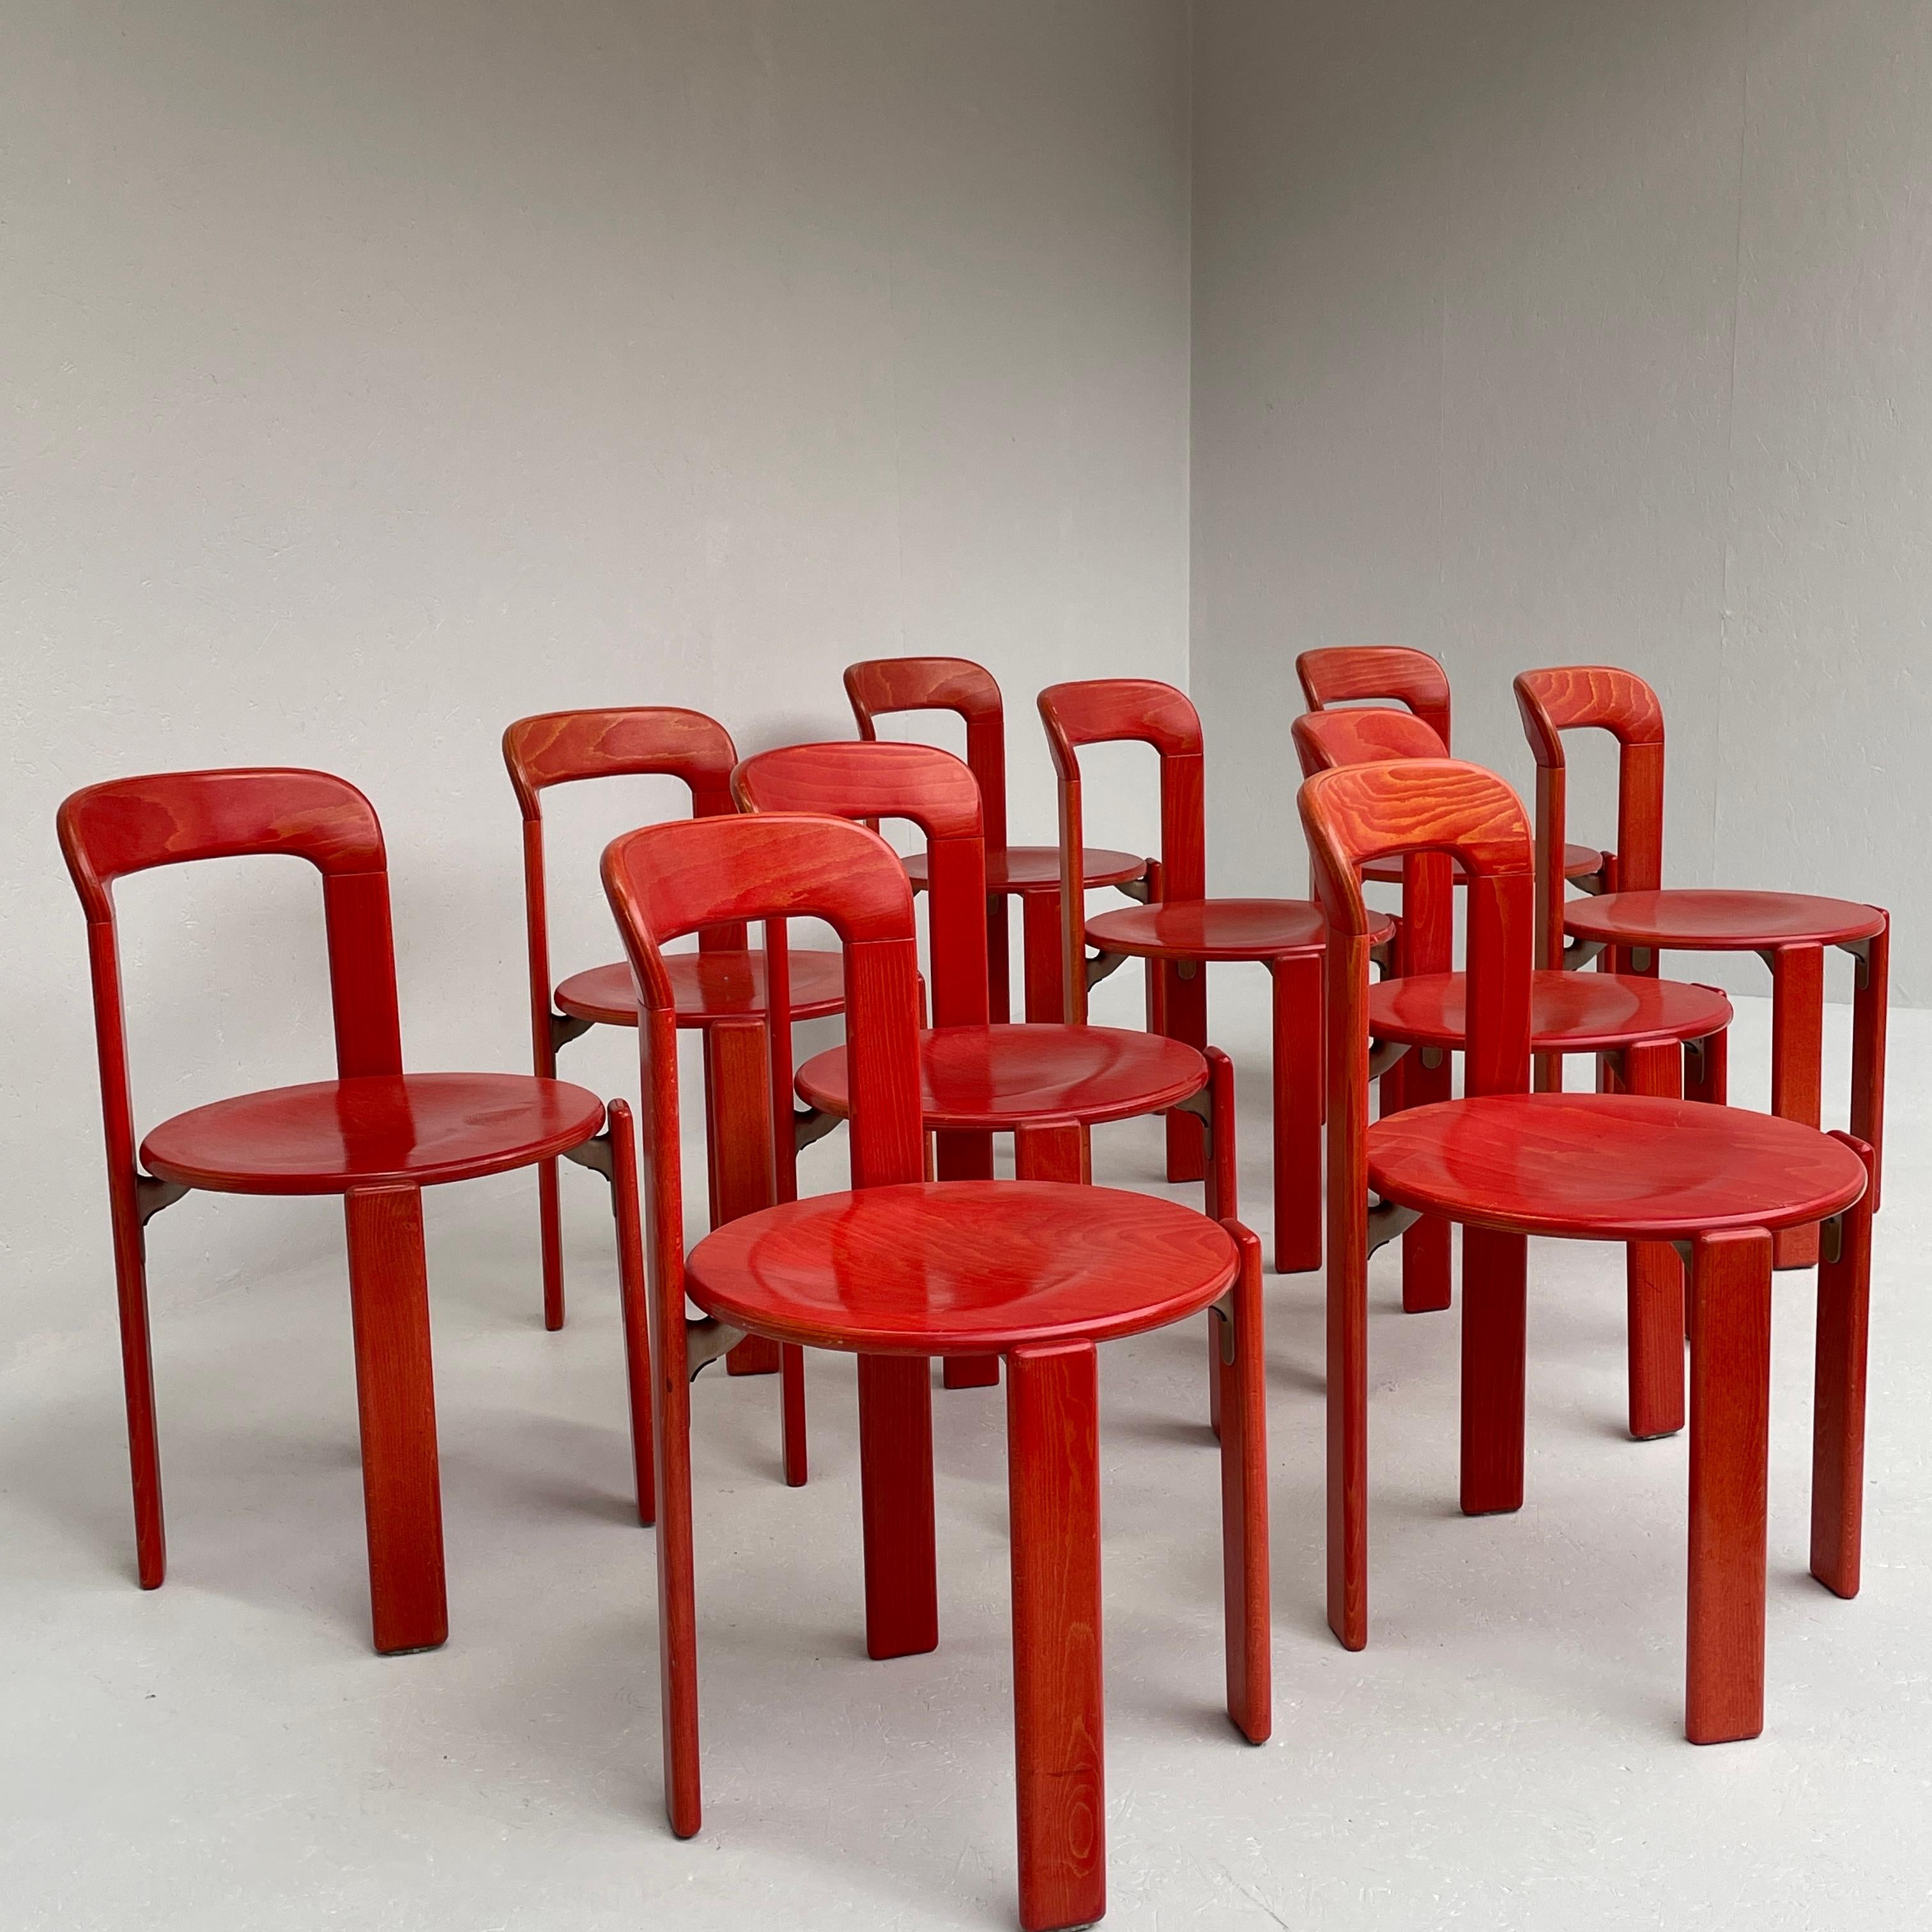 Rare and beautiful vintage stacking chairs by Bruno Rey for Dietiker.

The chairs are in an original virbant red color. Probably from the 1990.

Solid and very sturdy construction with Dietiker’s unqiue screwless wood-to-metal design.

The set